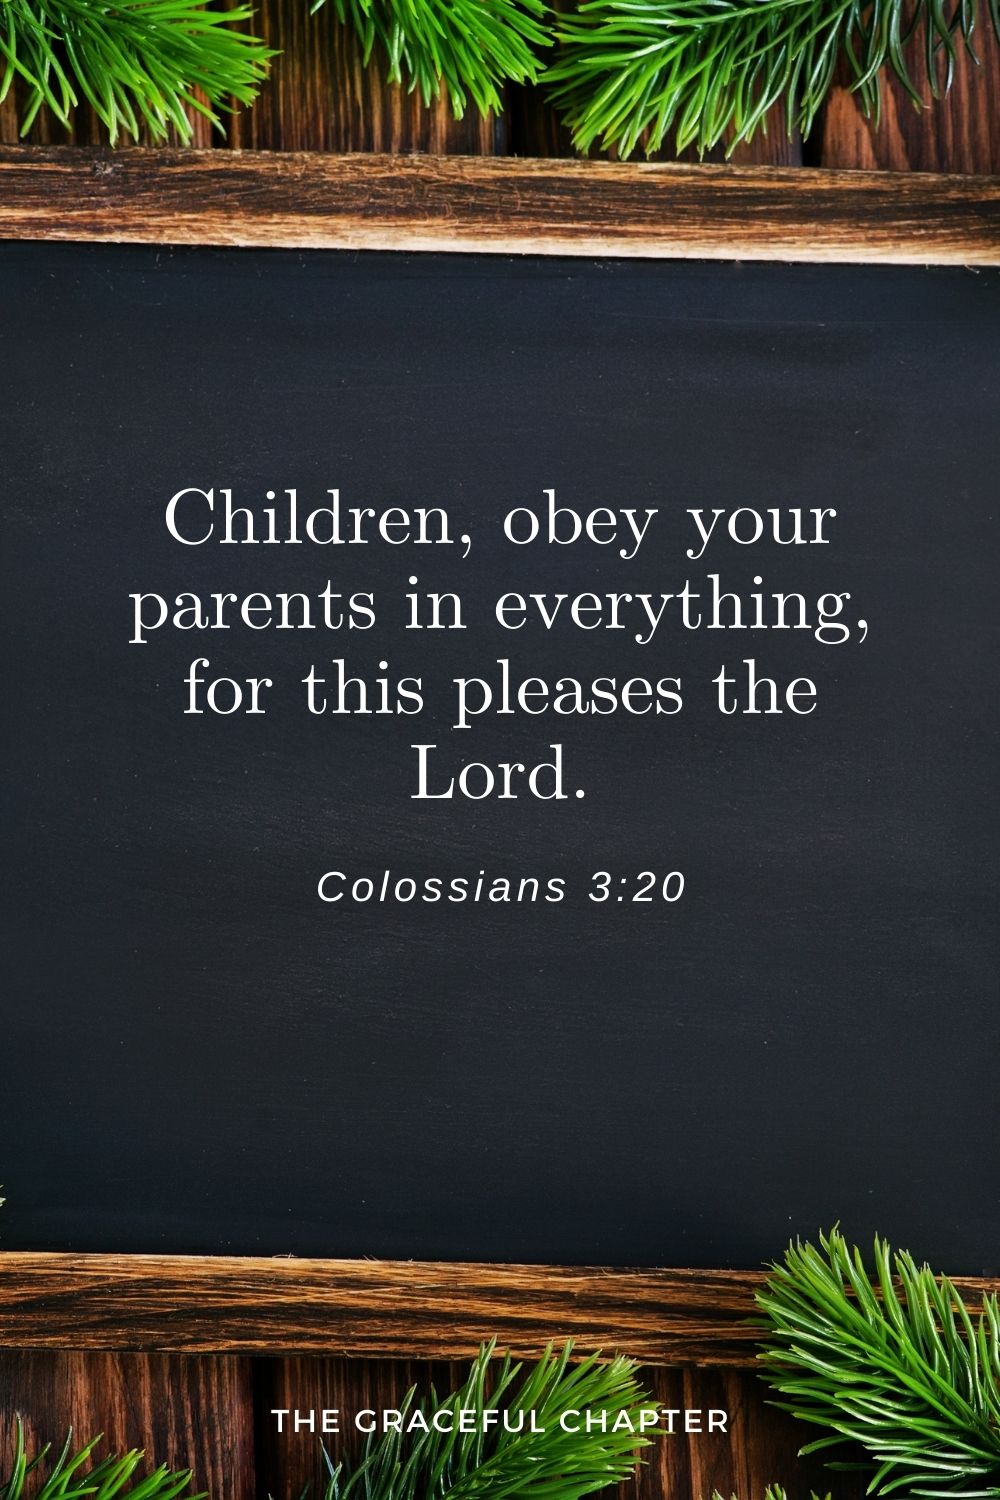 Children, obey your parents in everything, for this pleases the Lord. Children, obey your parents in everything, for this pleases the Lord. Colossians 3:20